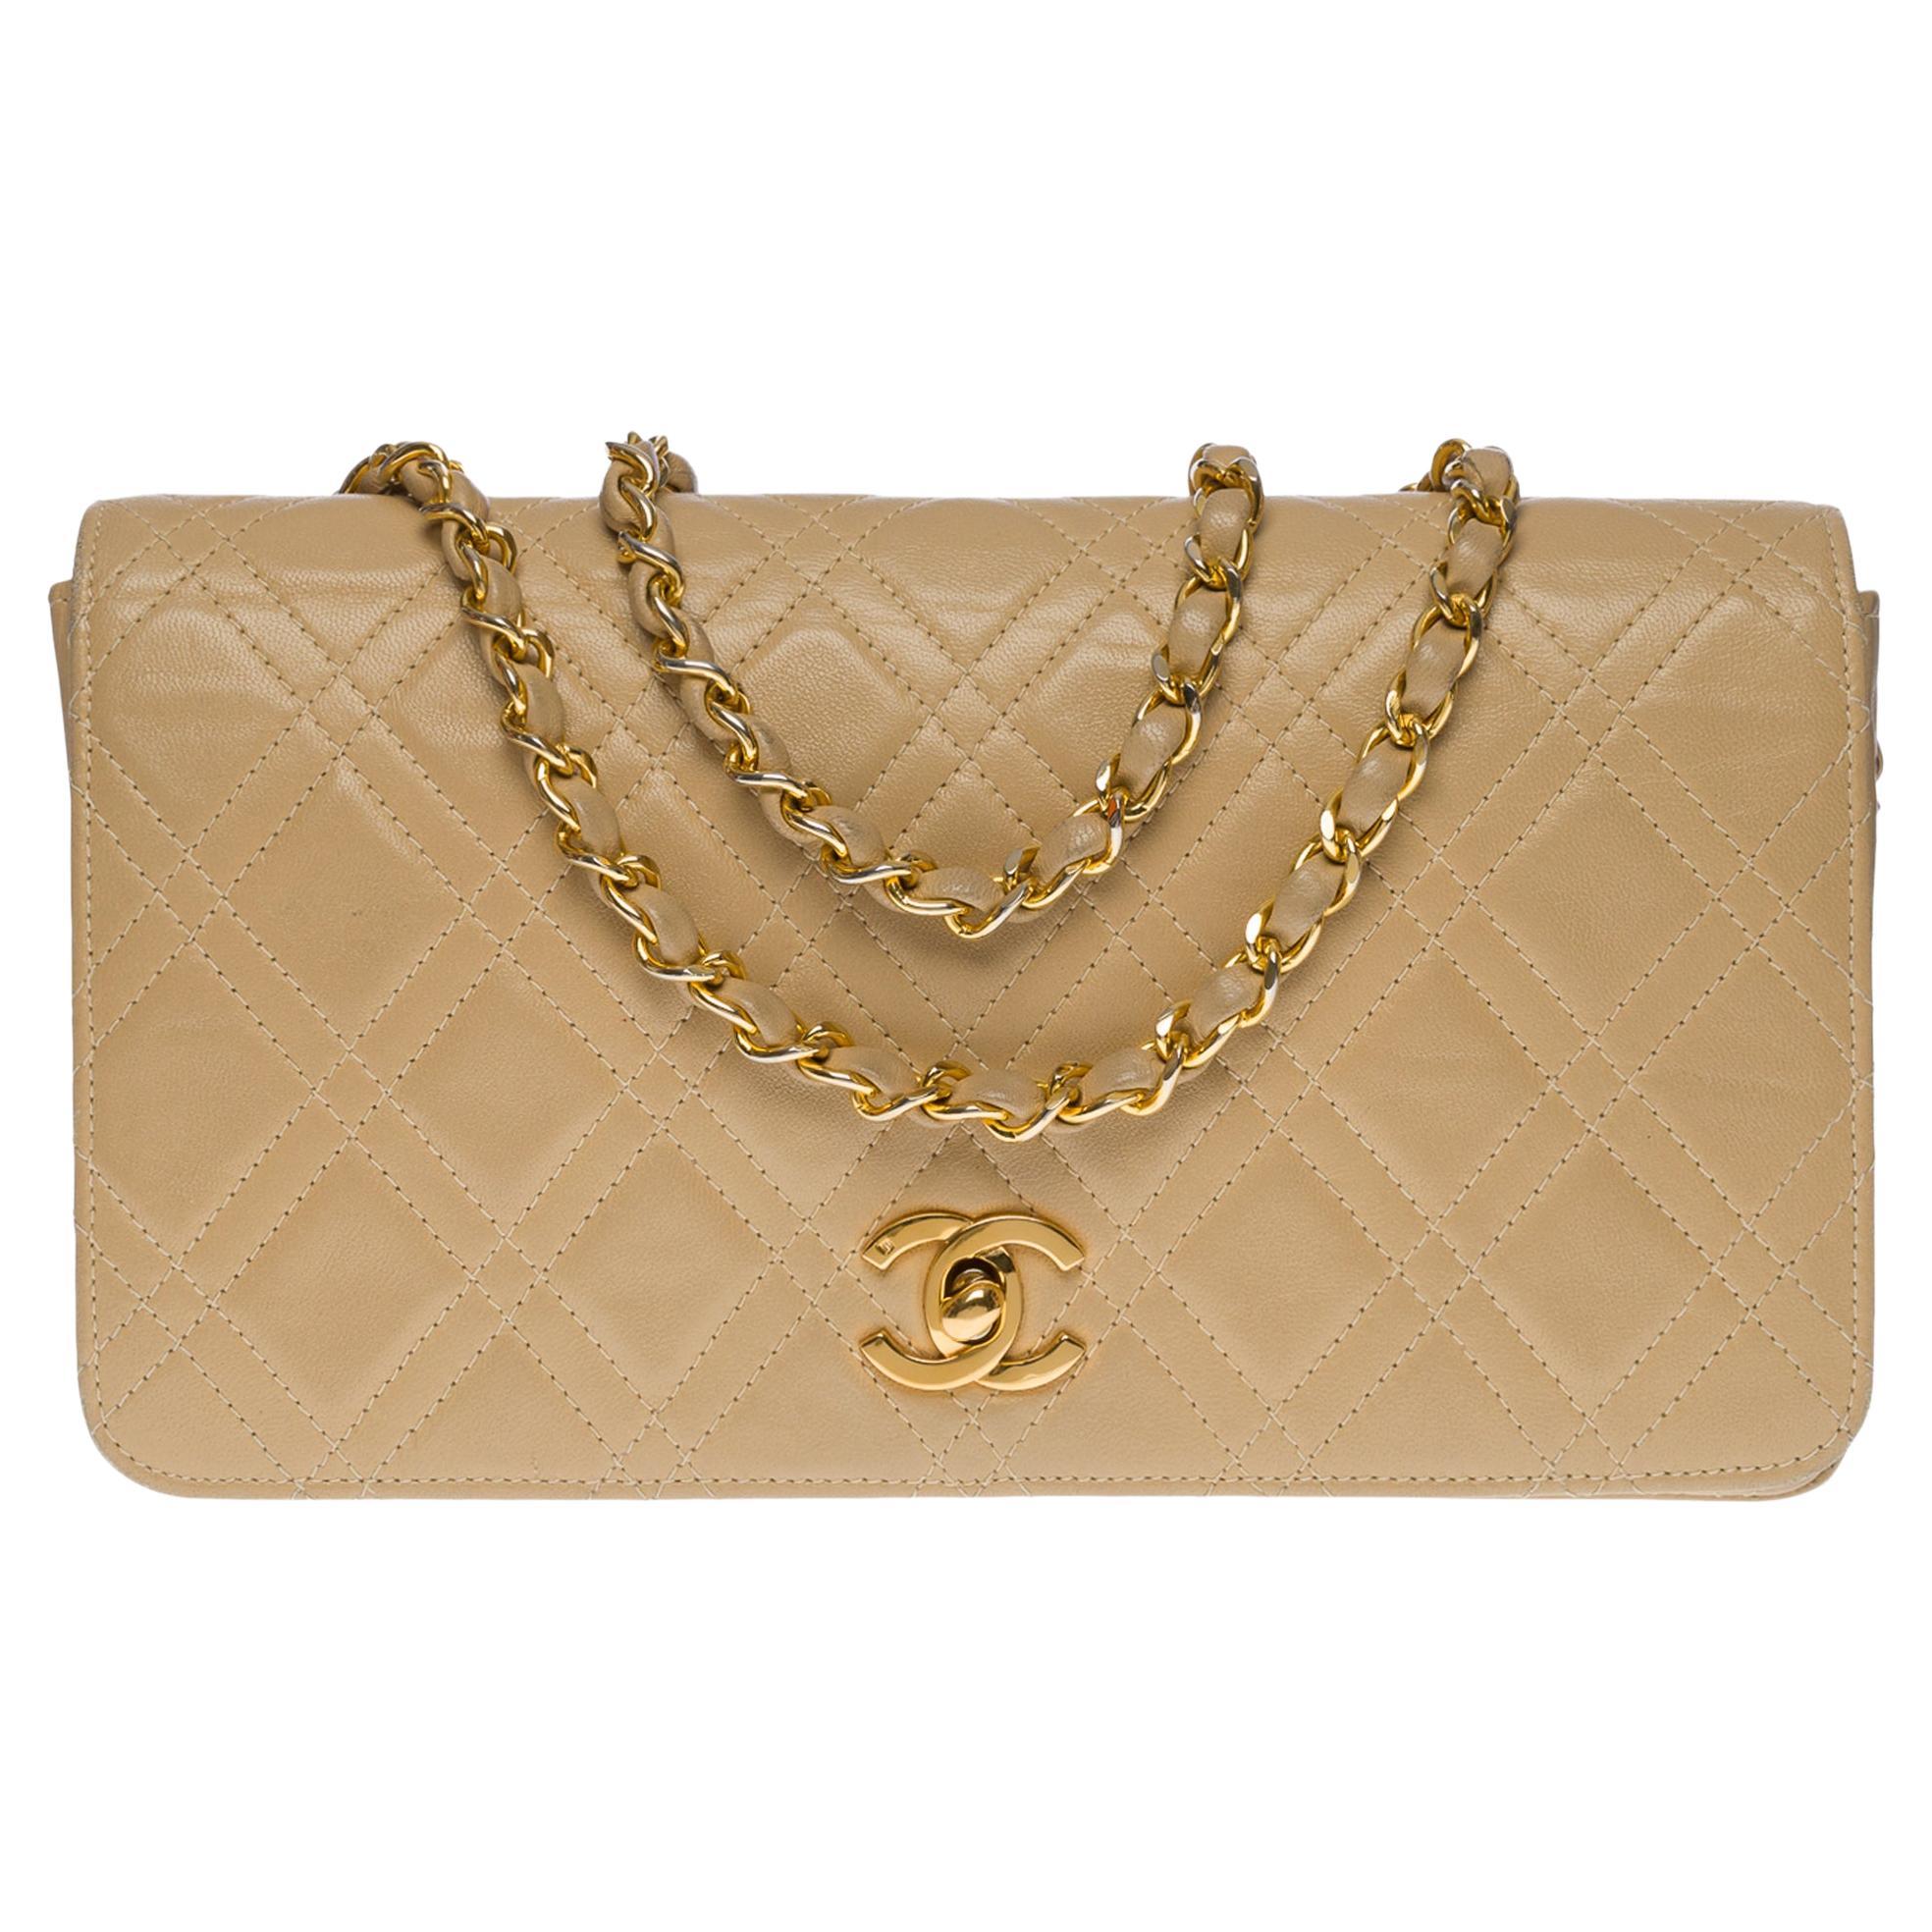 Chanel Classic Full Flap shoulder bag in beige quilted lambskin leather, GHW